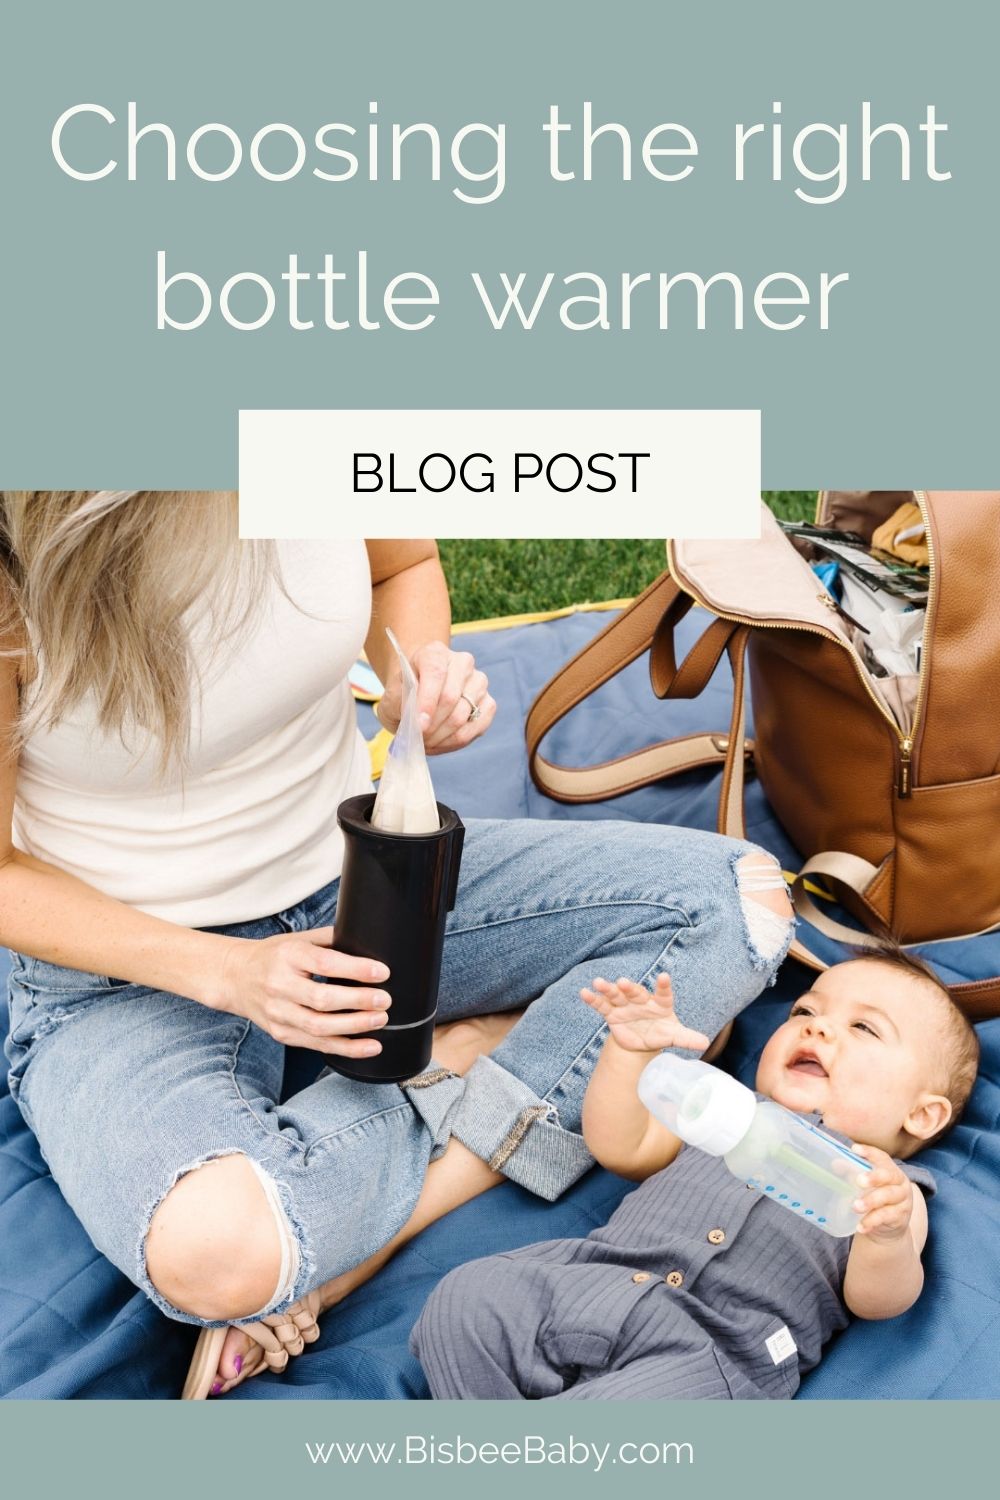 Warm breast milk bags on-the-go with portable bottle warmer